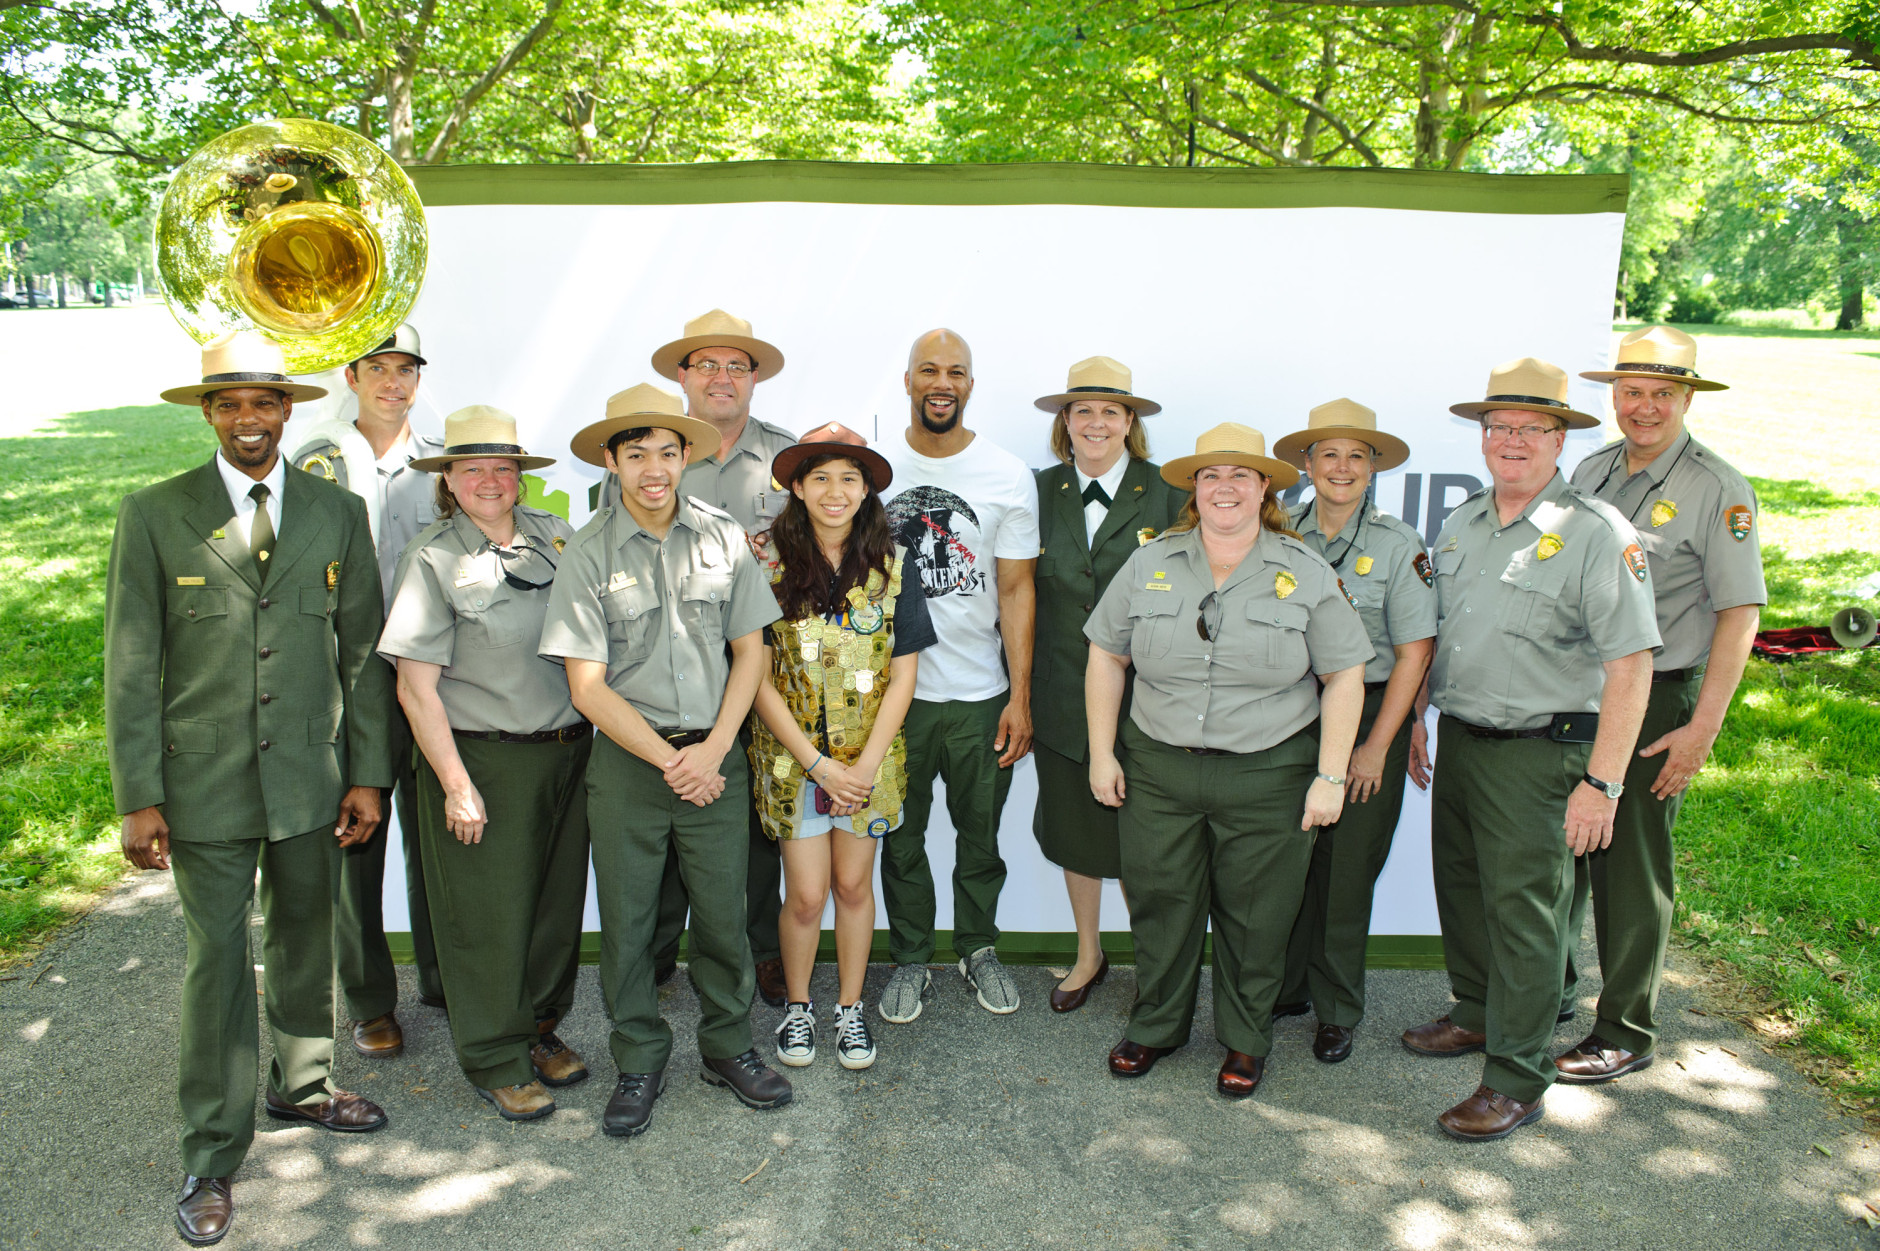 CHICAGO, IL - JUNE 11: Common and members of the National Park Service attend the National Park Service Centennial Event at Washington Park on June 11, 2016 in Chicago, Illinois.  (Photo by Timothy Hiatt/Getty Images for the National Park Foundation)